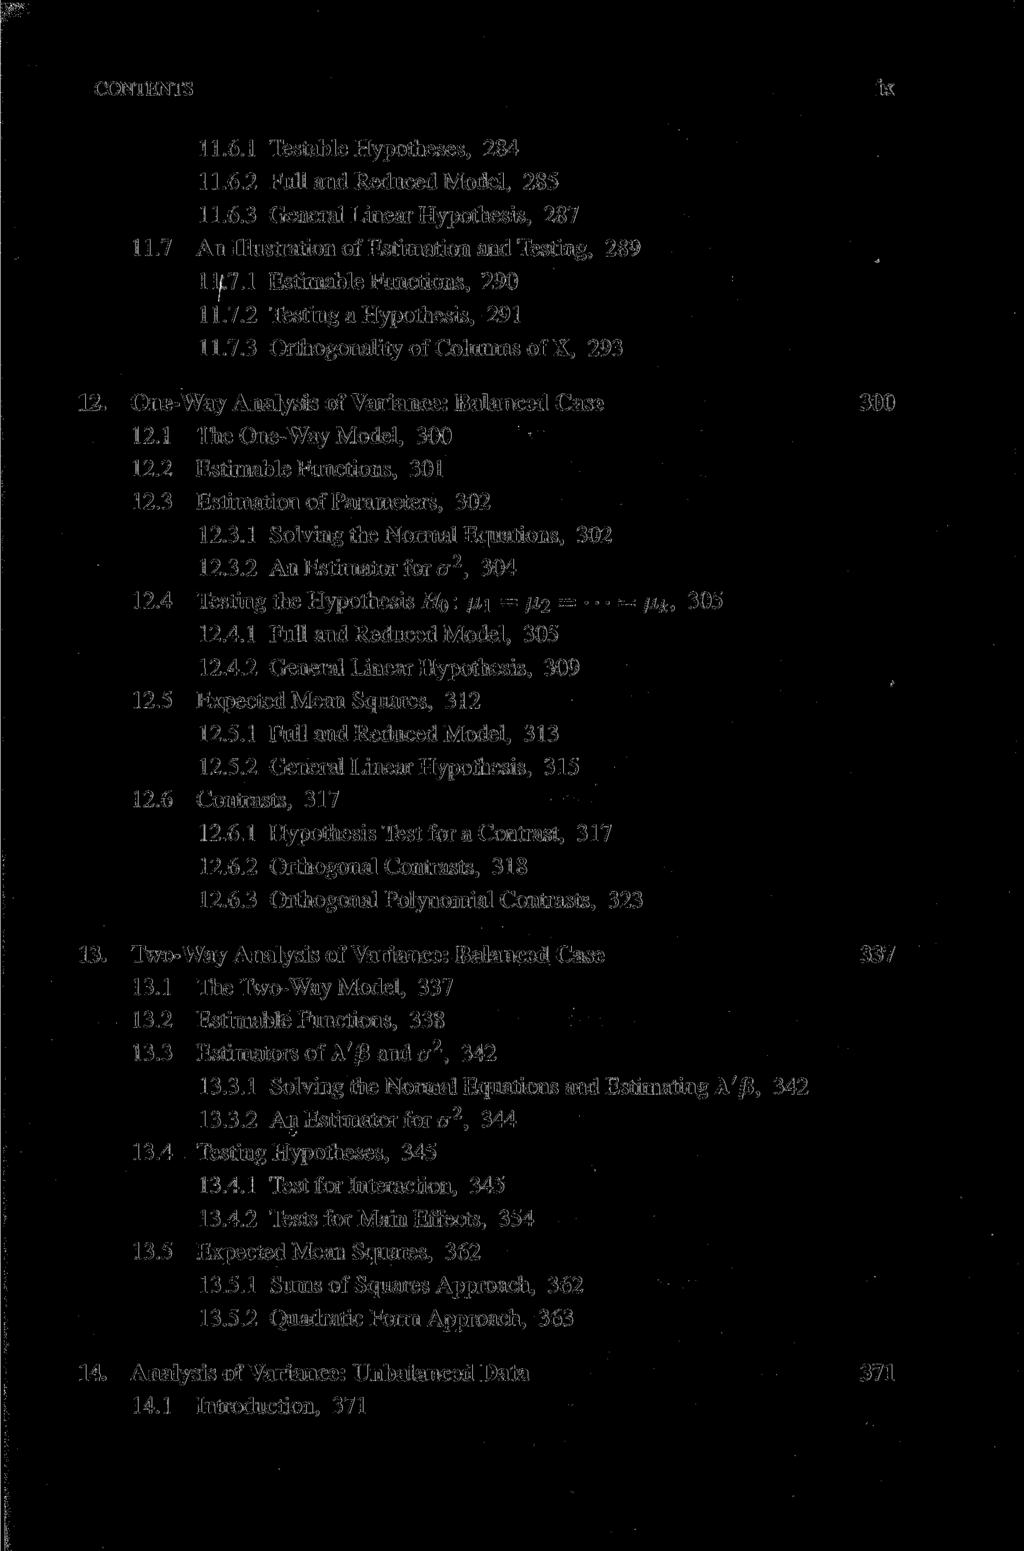 CONTENTS ix 11.6.1 Testable Hypotheses, 284 11.6.2 Füll and Reduced Model, 285 11.6.3 General Linear Hypothesis, 287 11.7 An Illustration of Estimation and Testing, 289 11.7.1 Estimable Functions, 290 11.